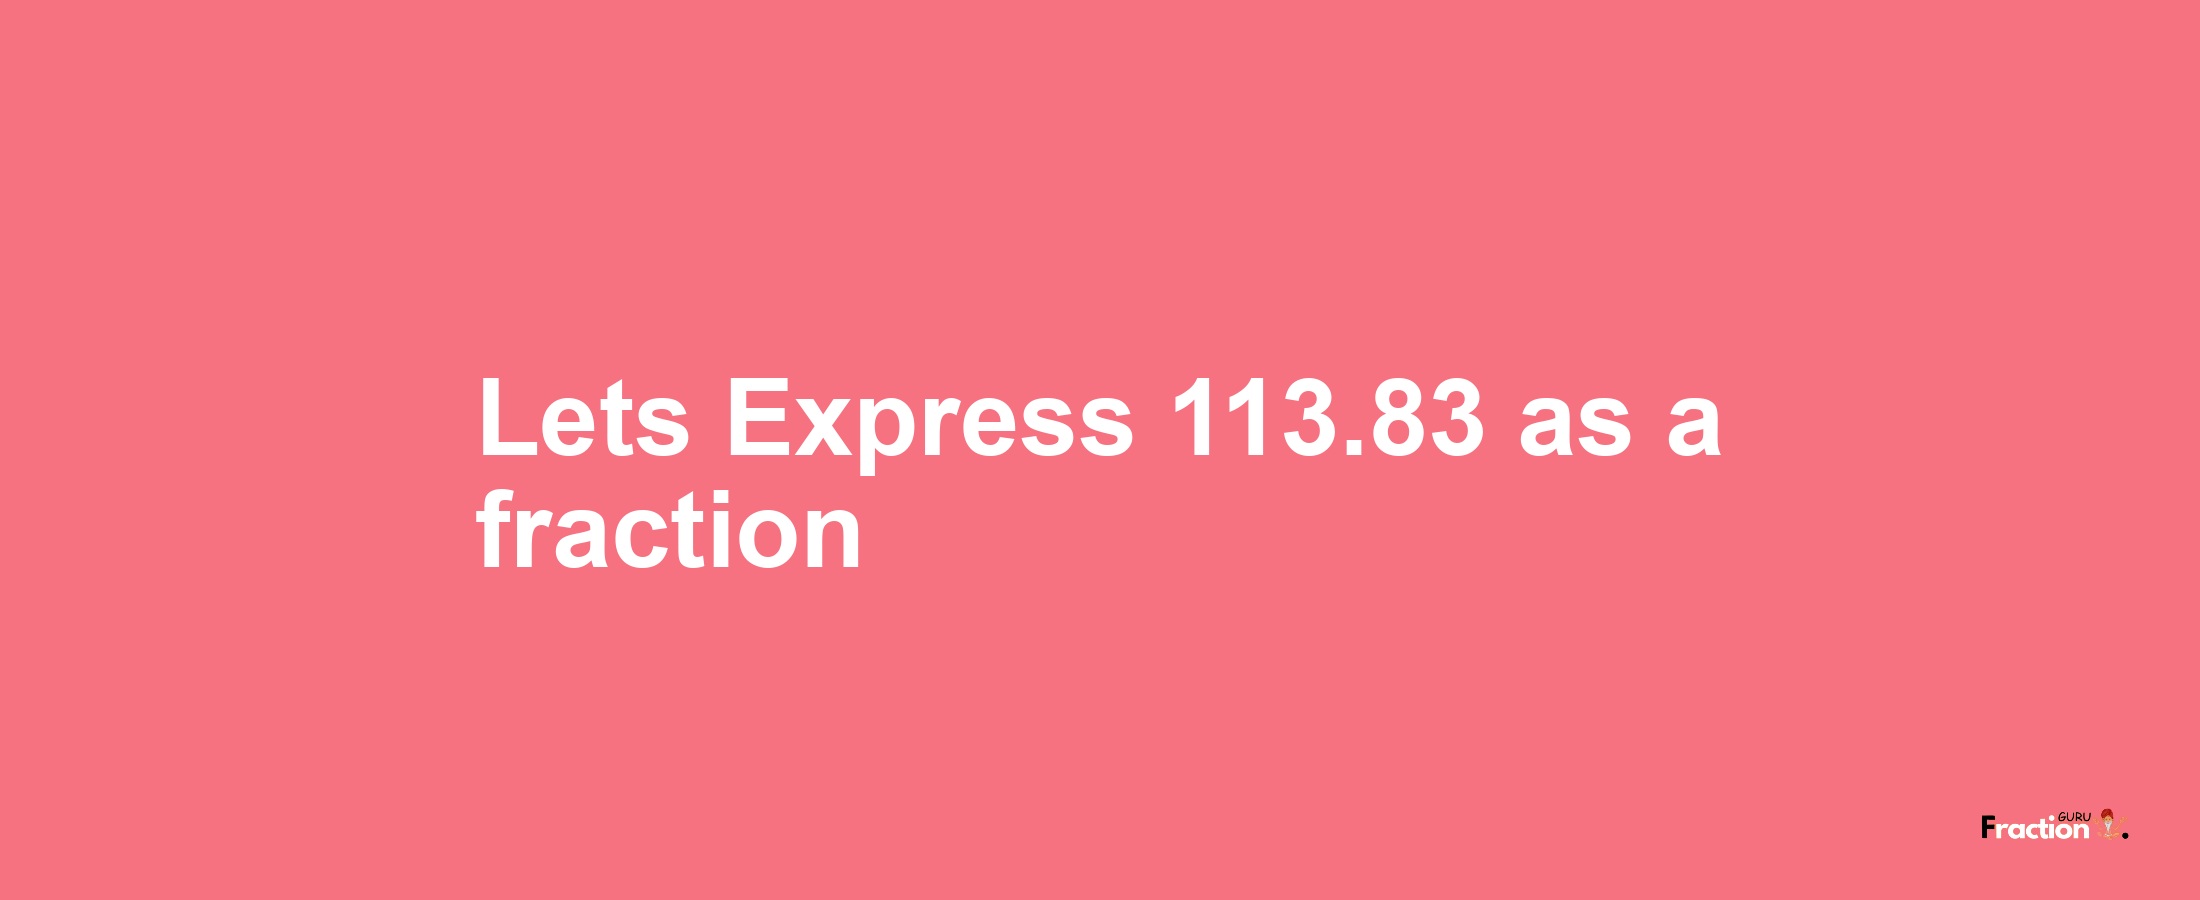 Lets Express 113.83 as afraction